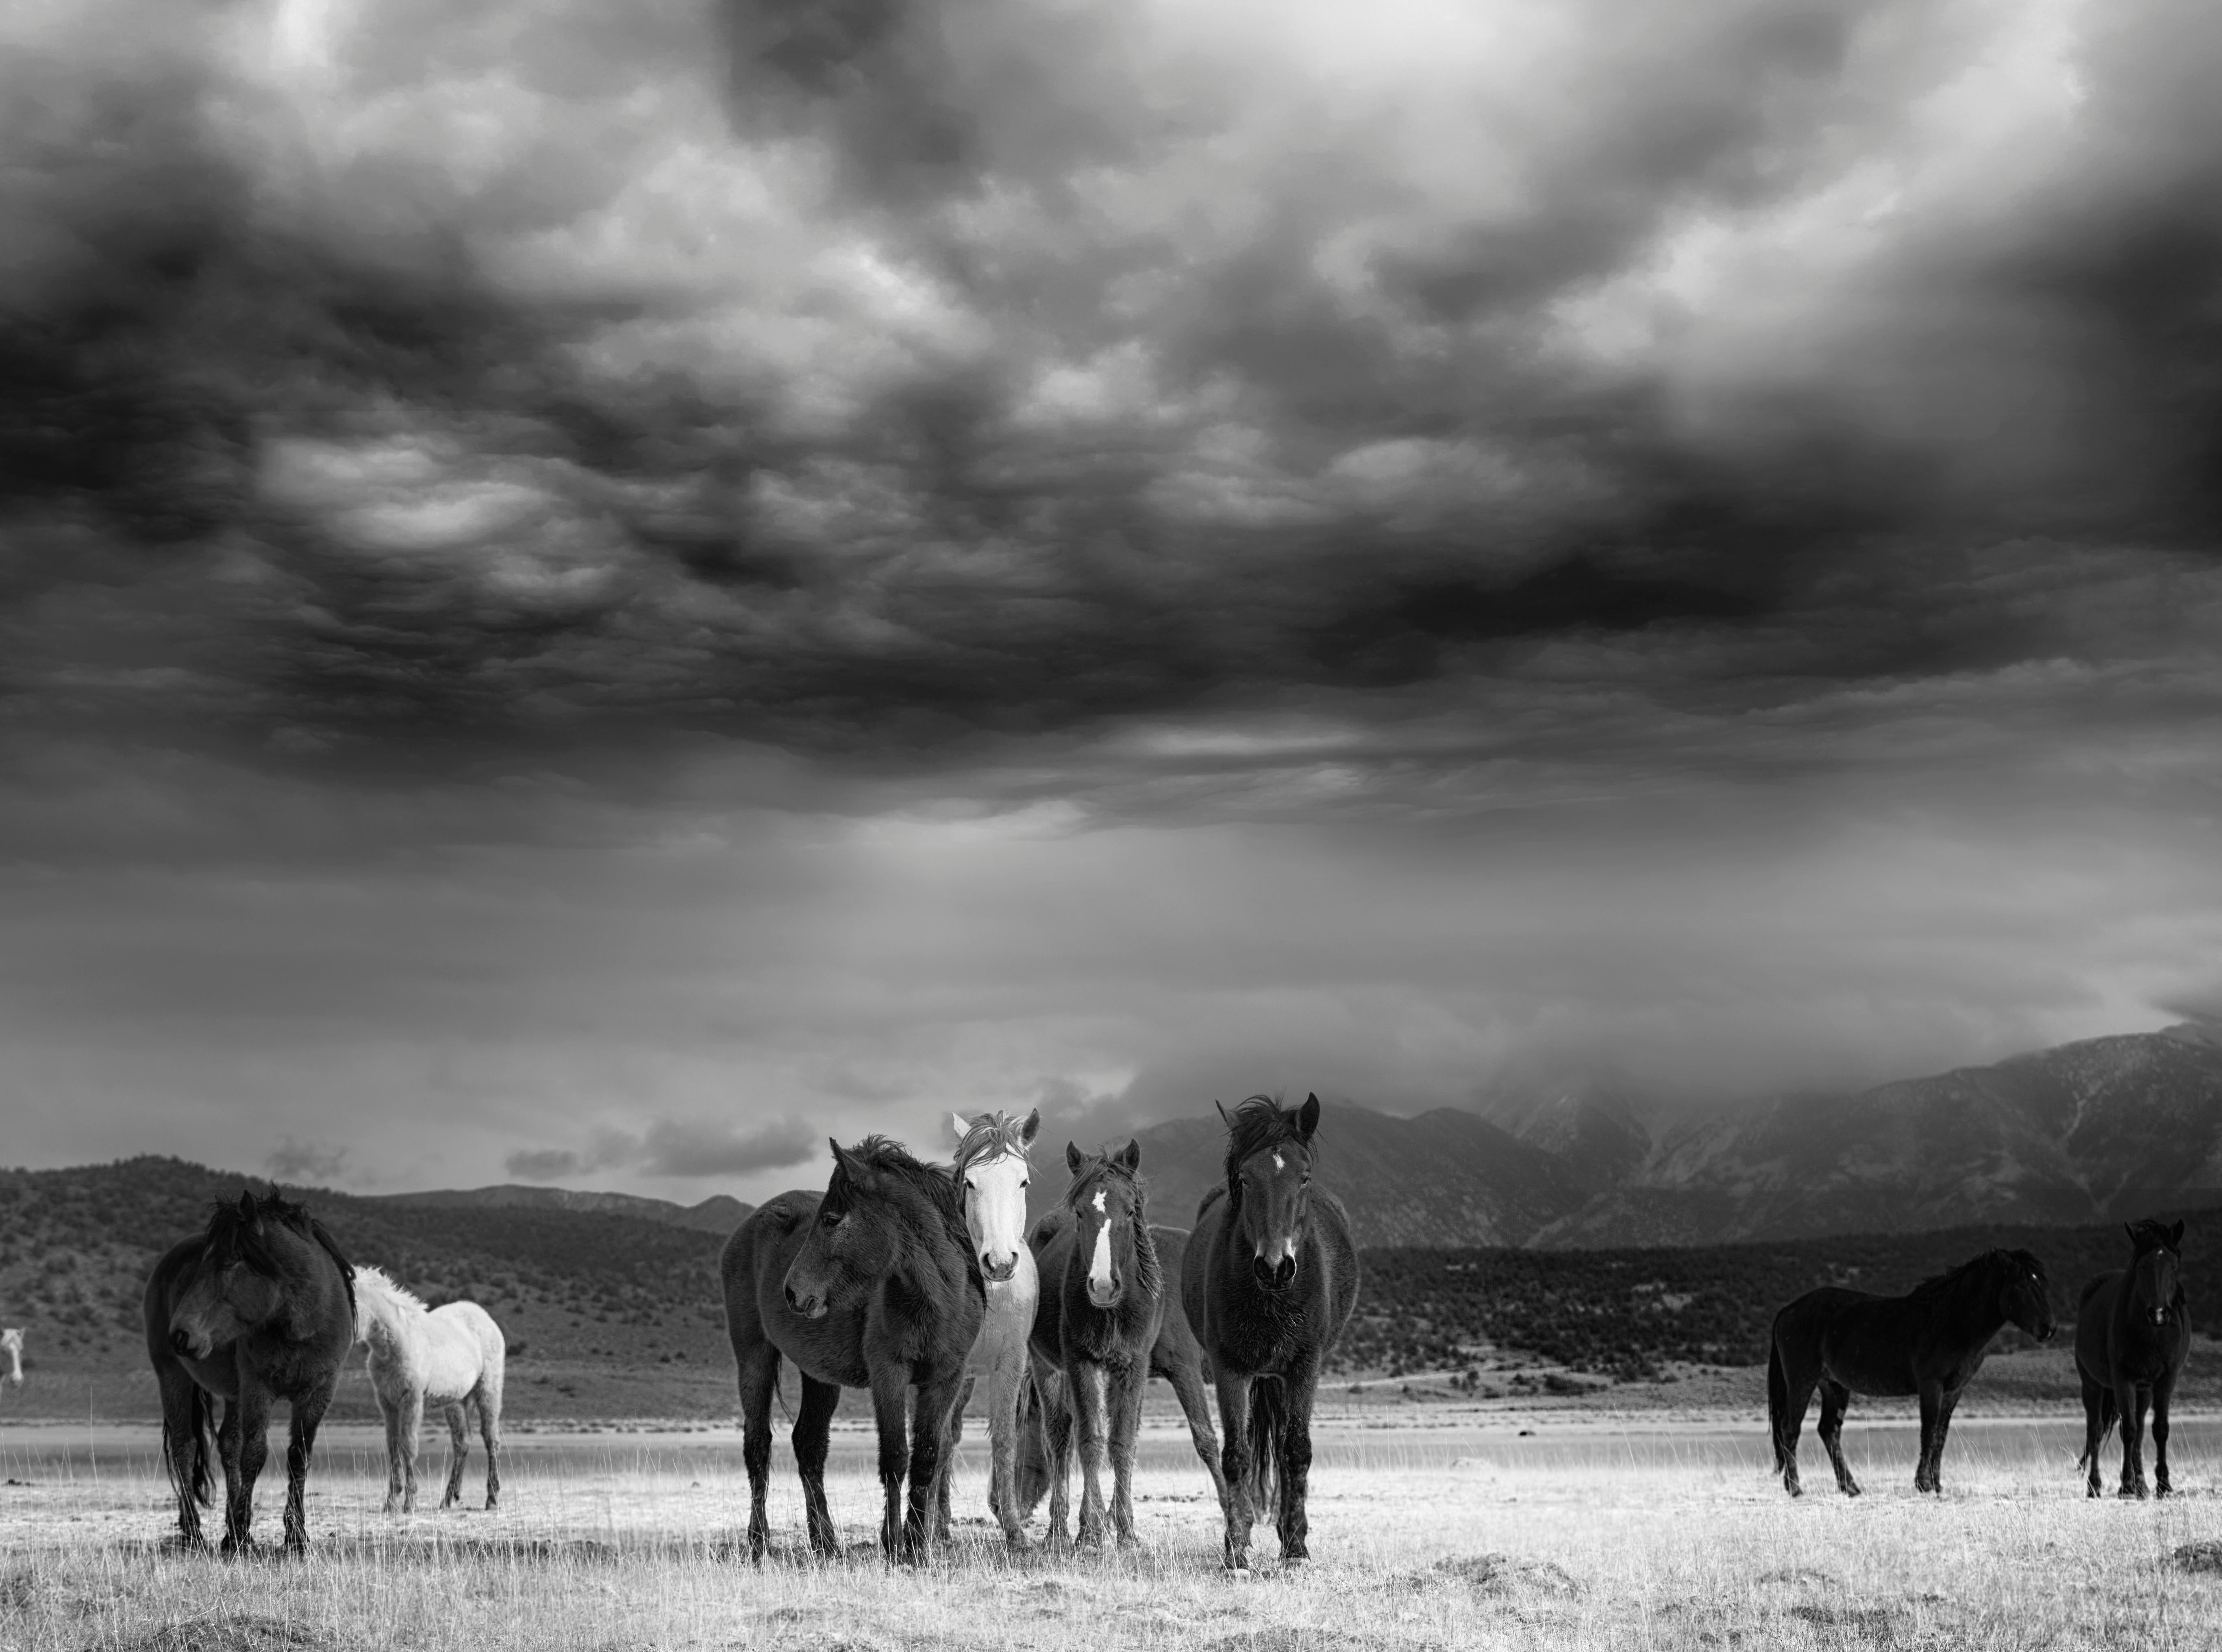 Shane Russeck Animal Print - "The Calm" 28x40 Signed Black and White Photography of Wild Horses, Mustangs  